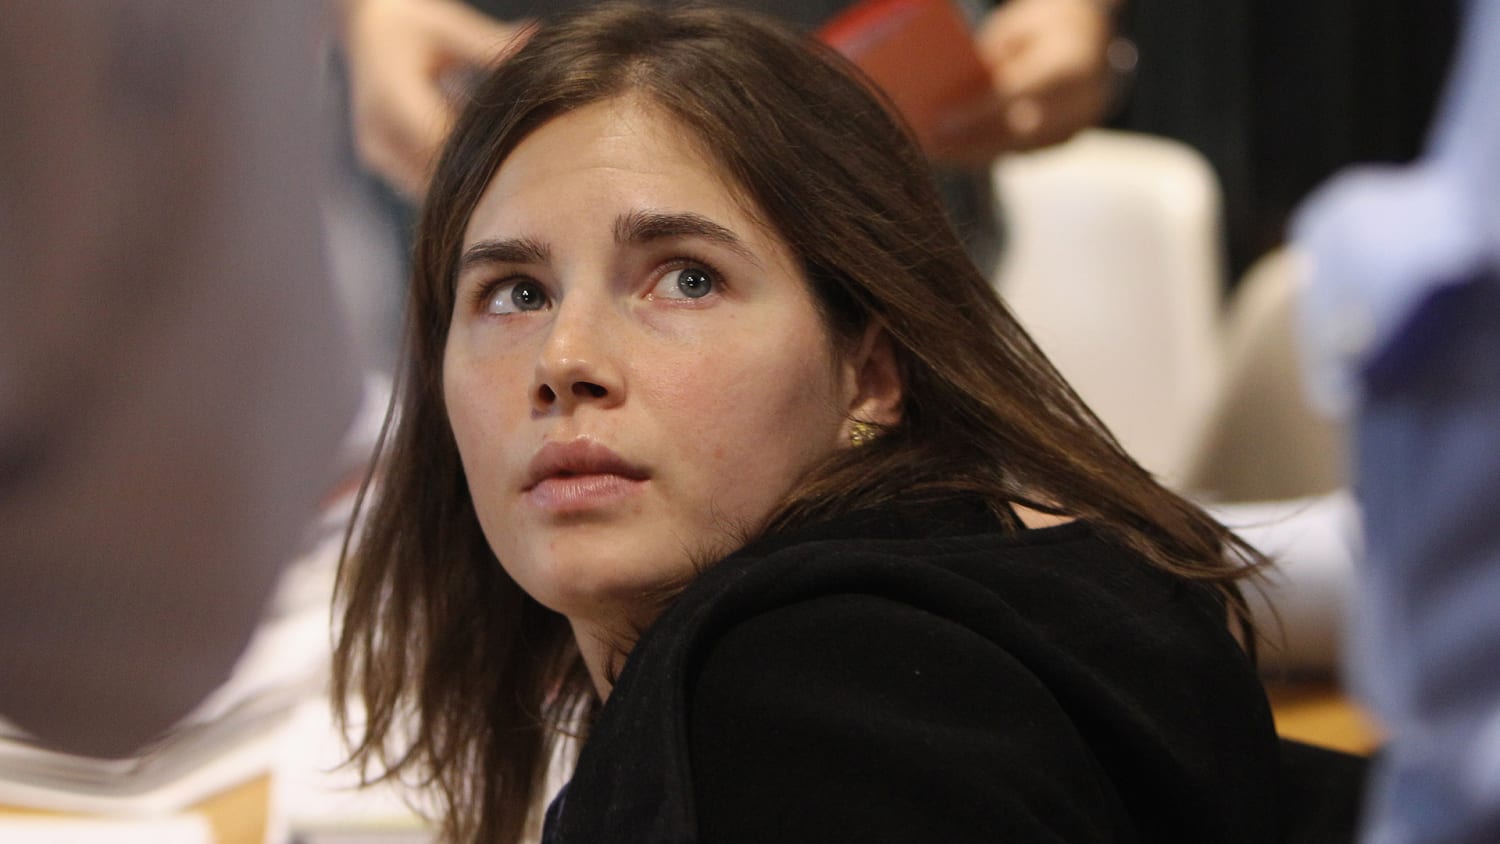 Amanda Knox reveals she considered suicide while in prison - TODAY.com